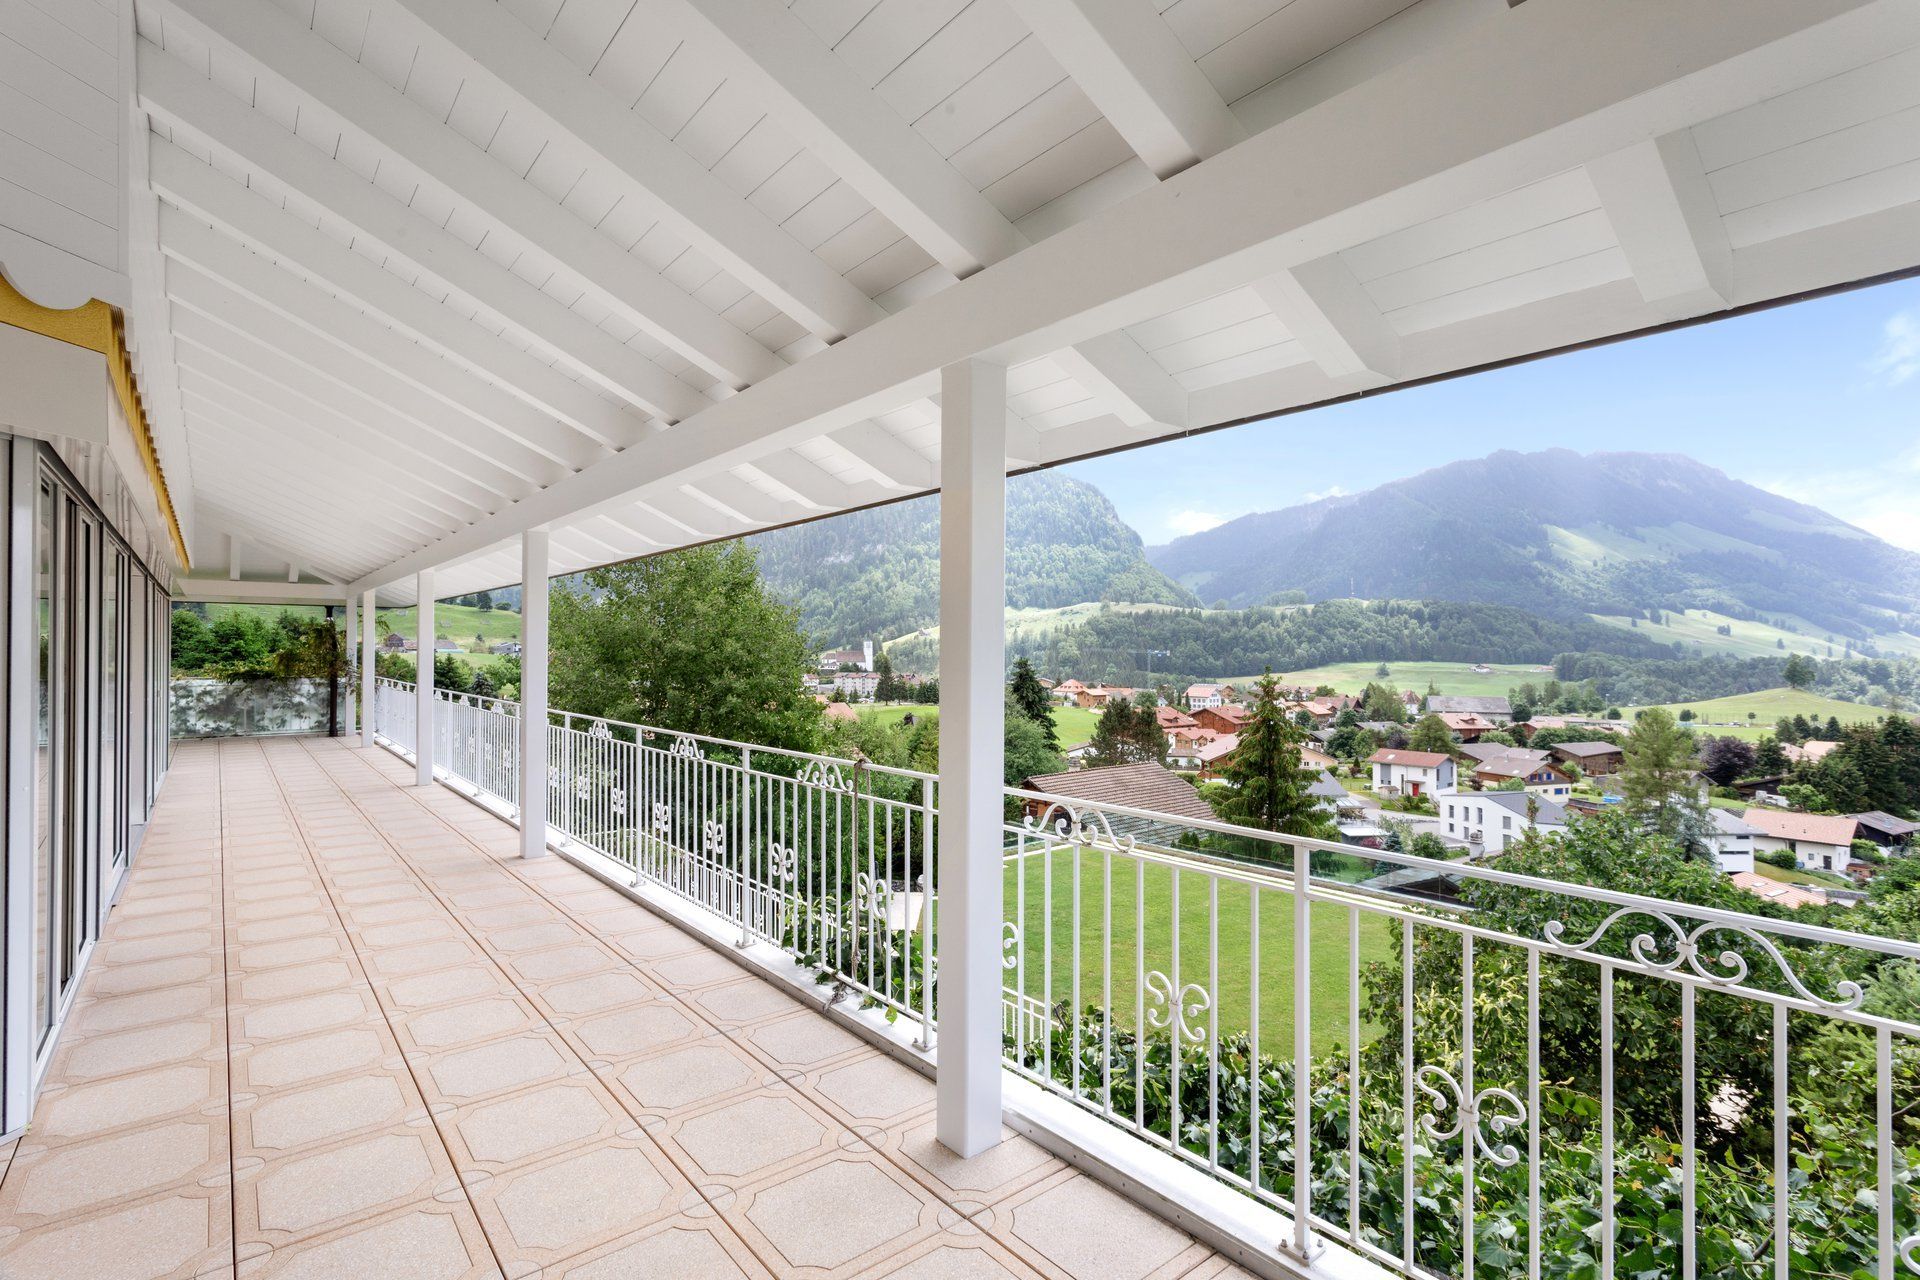 Balcony with unobstructed view of the village and the mountains